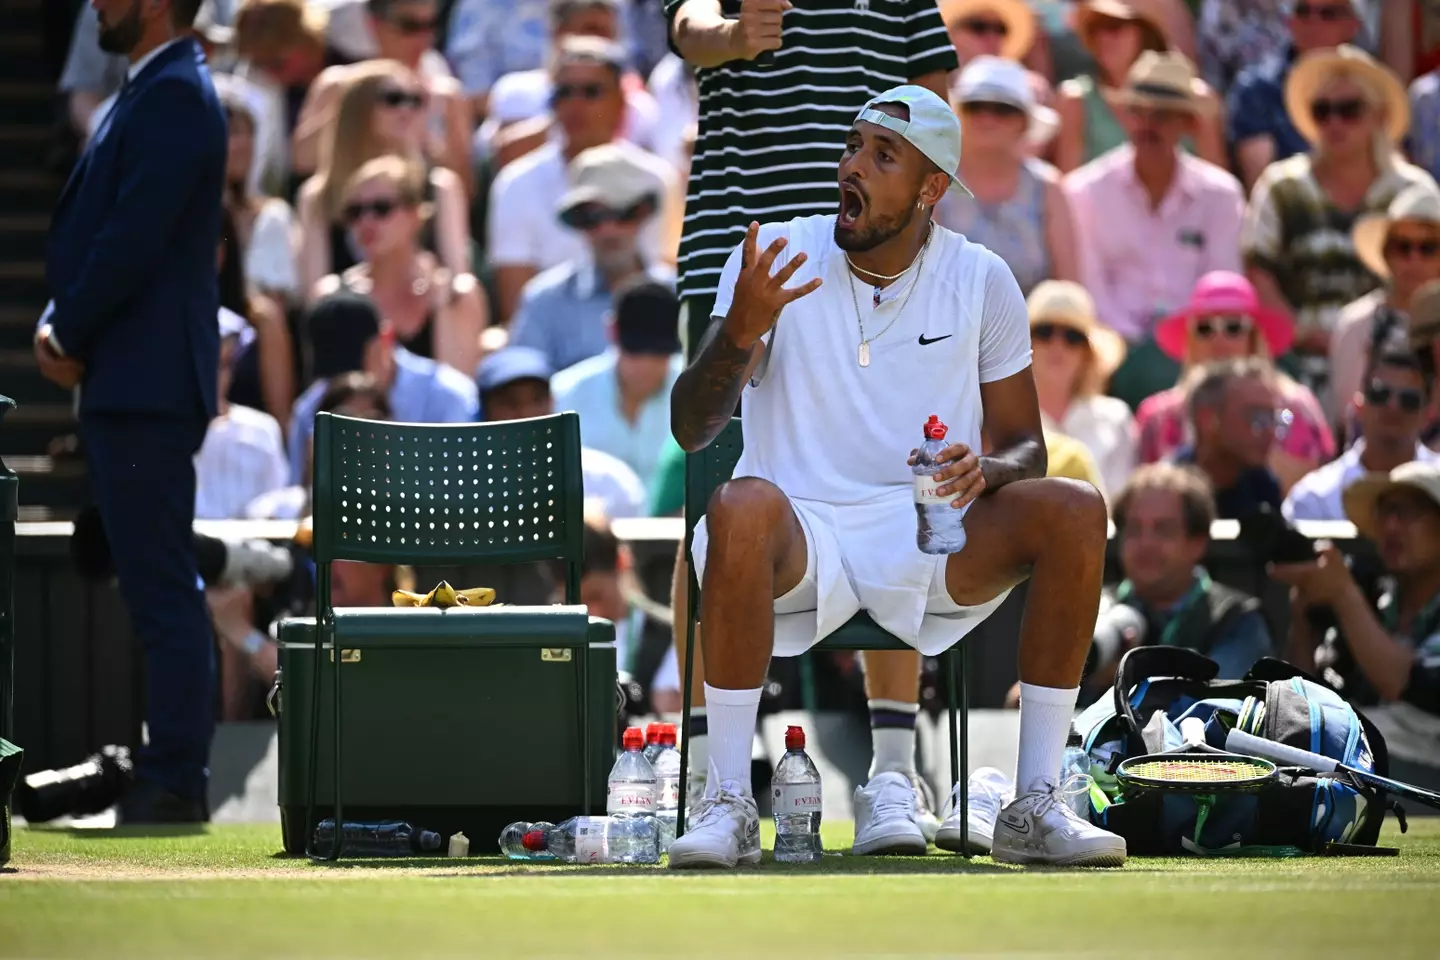 Kyrgios was not happy even during the final. Image: Alamy